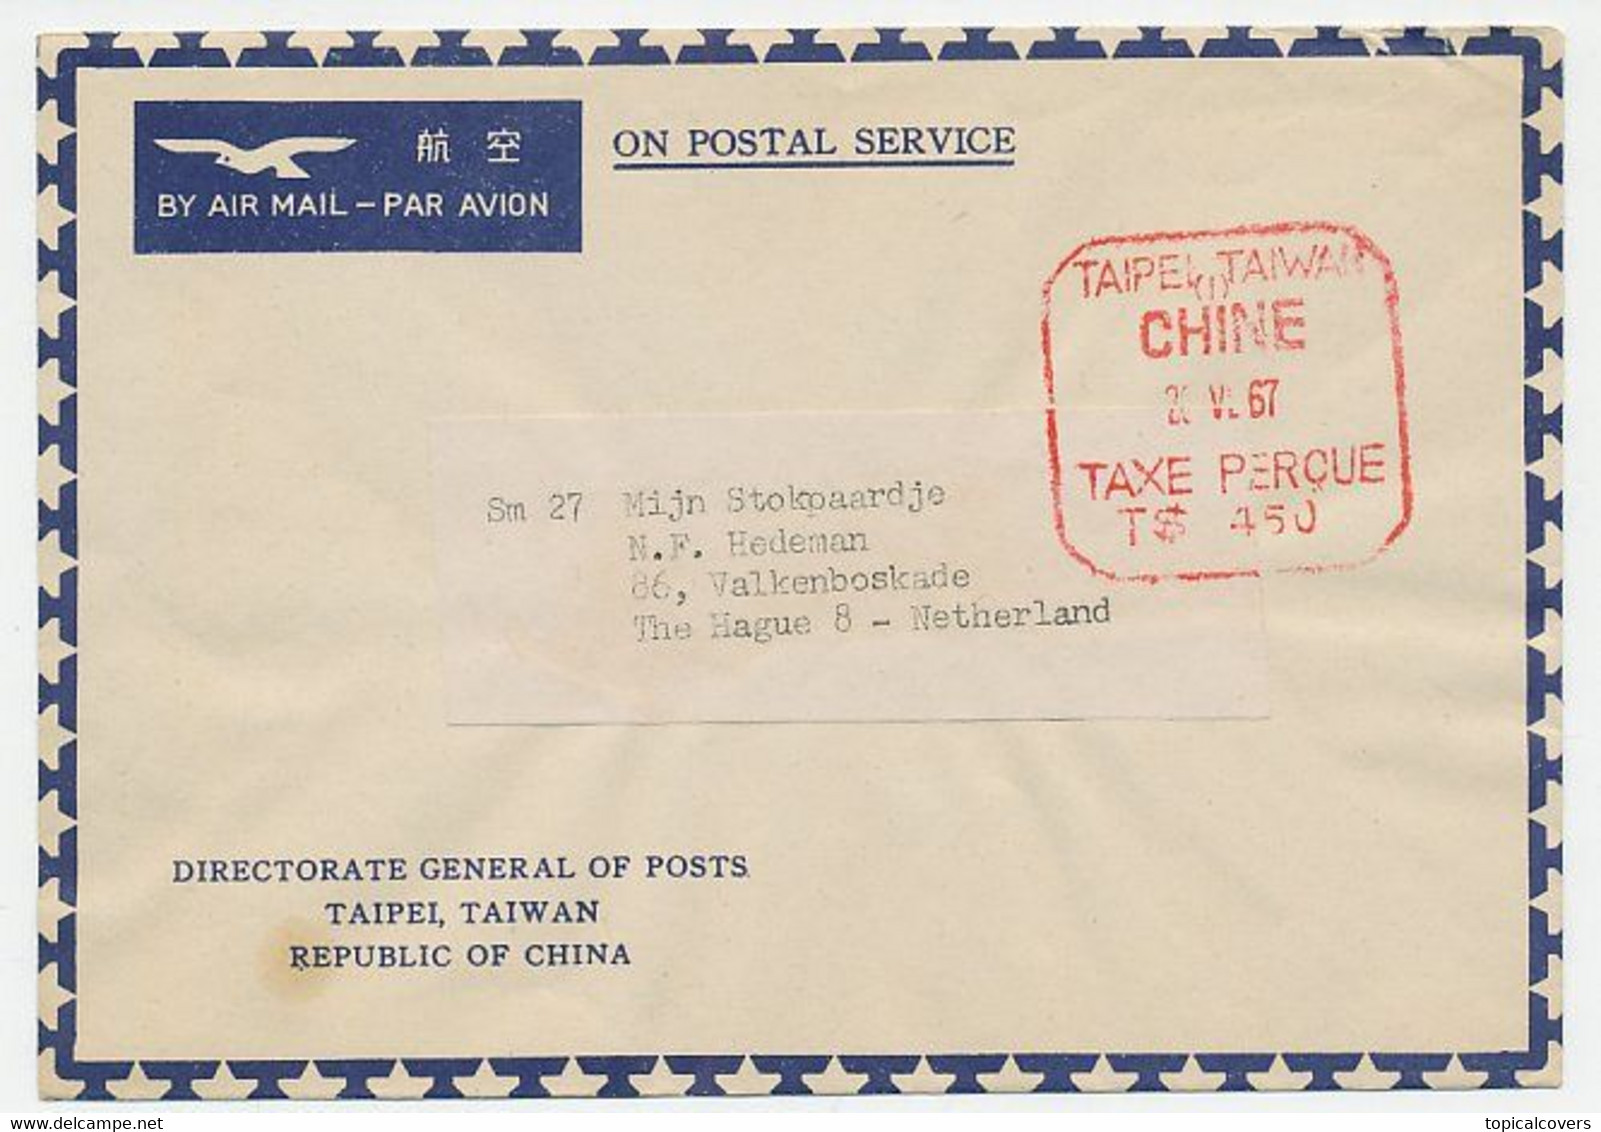 Taxe Percue Service Cover Taipei Taiwan Chine / China - The Netherlands 1967 - Covers & Documents